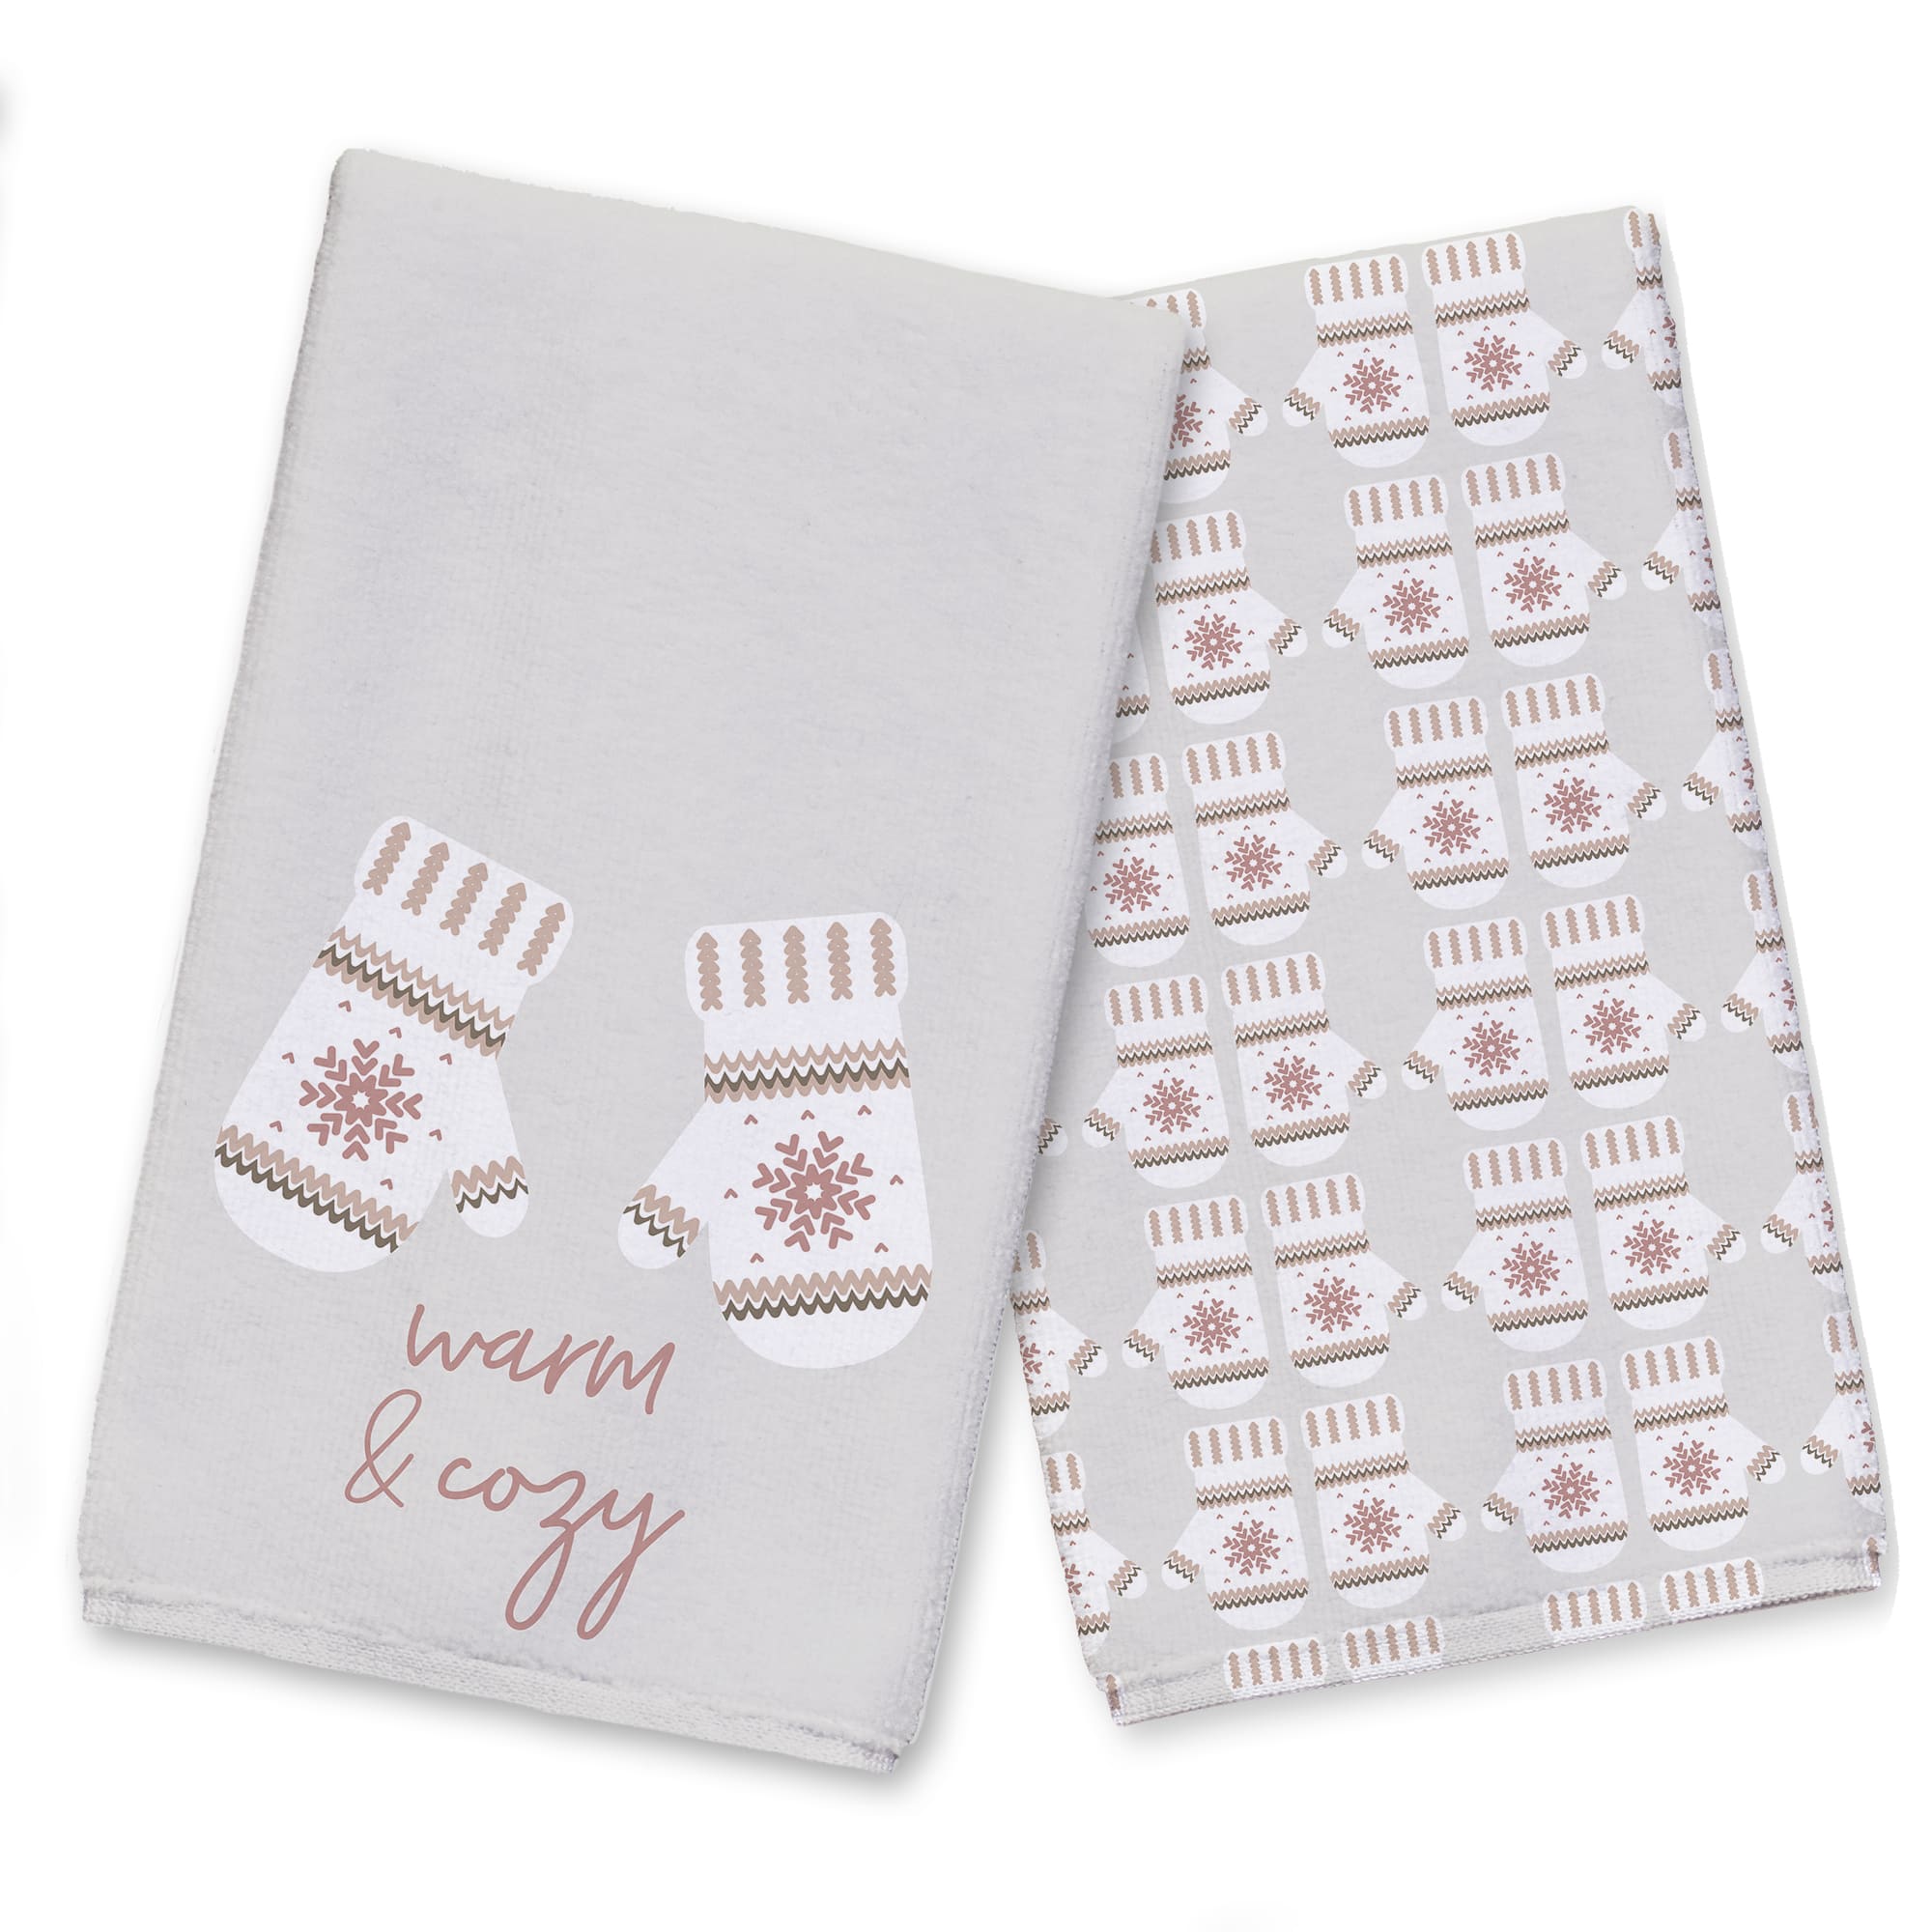 Warm And Cozy Mittens Tea Towels - Set of 2